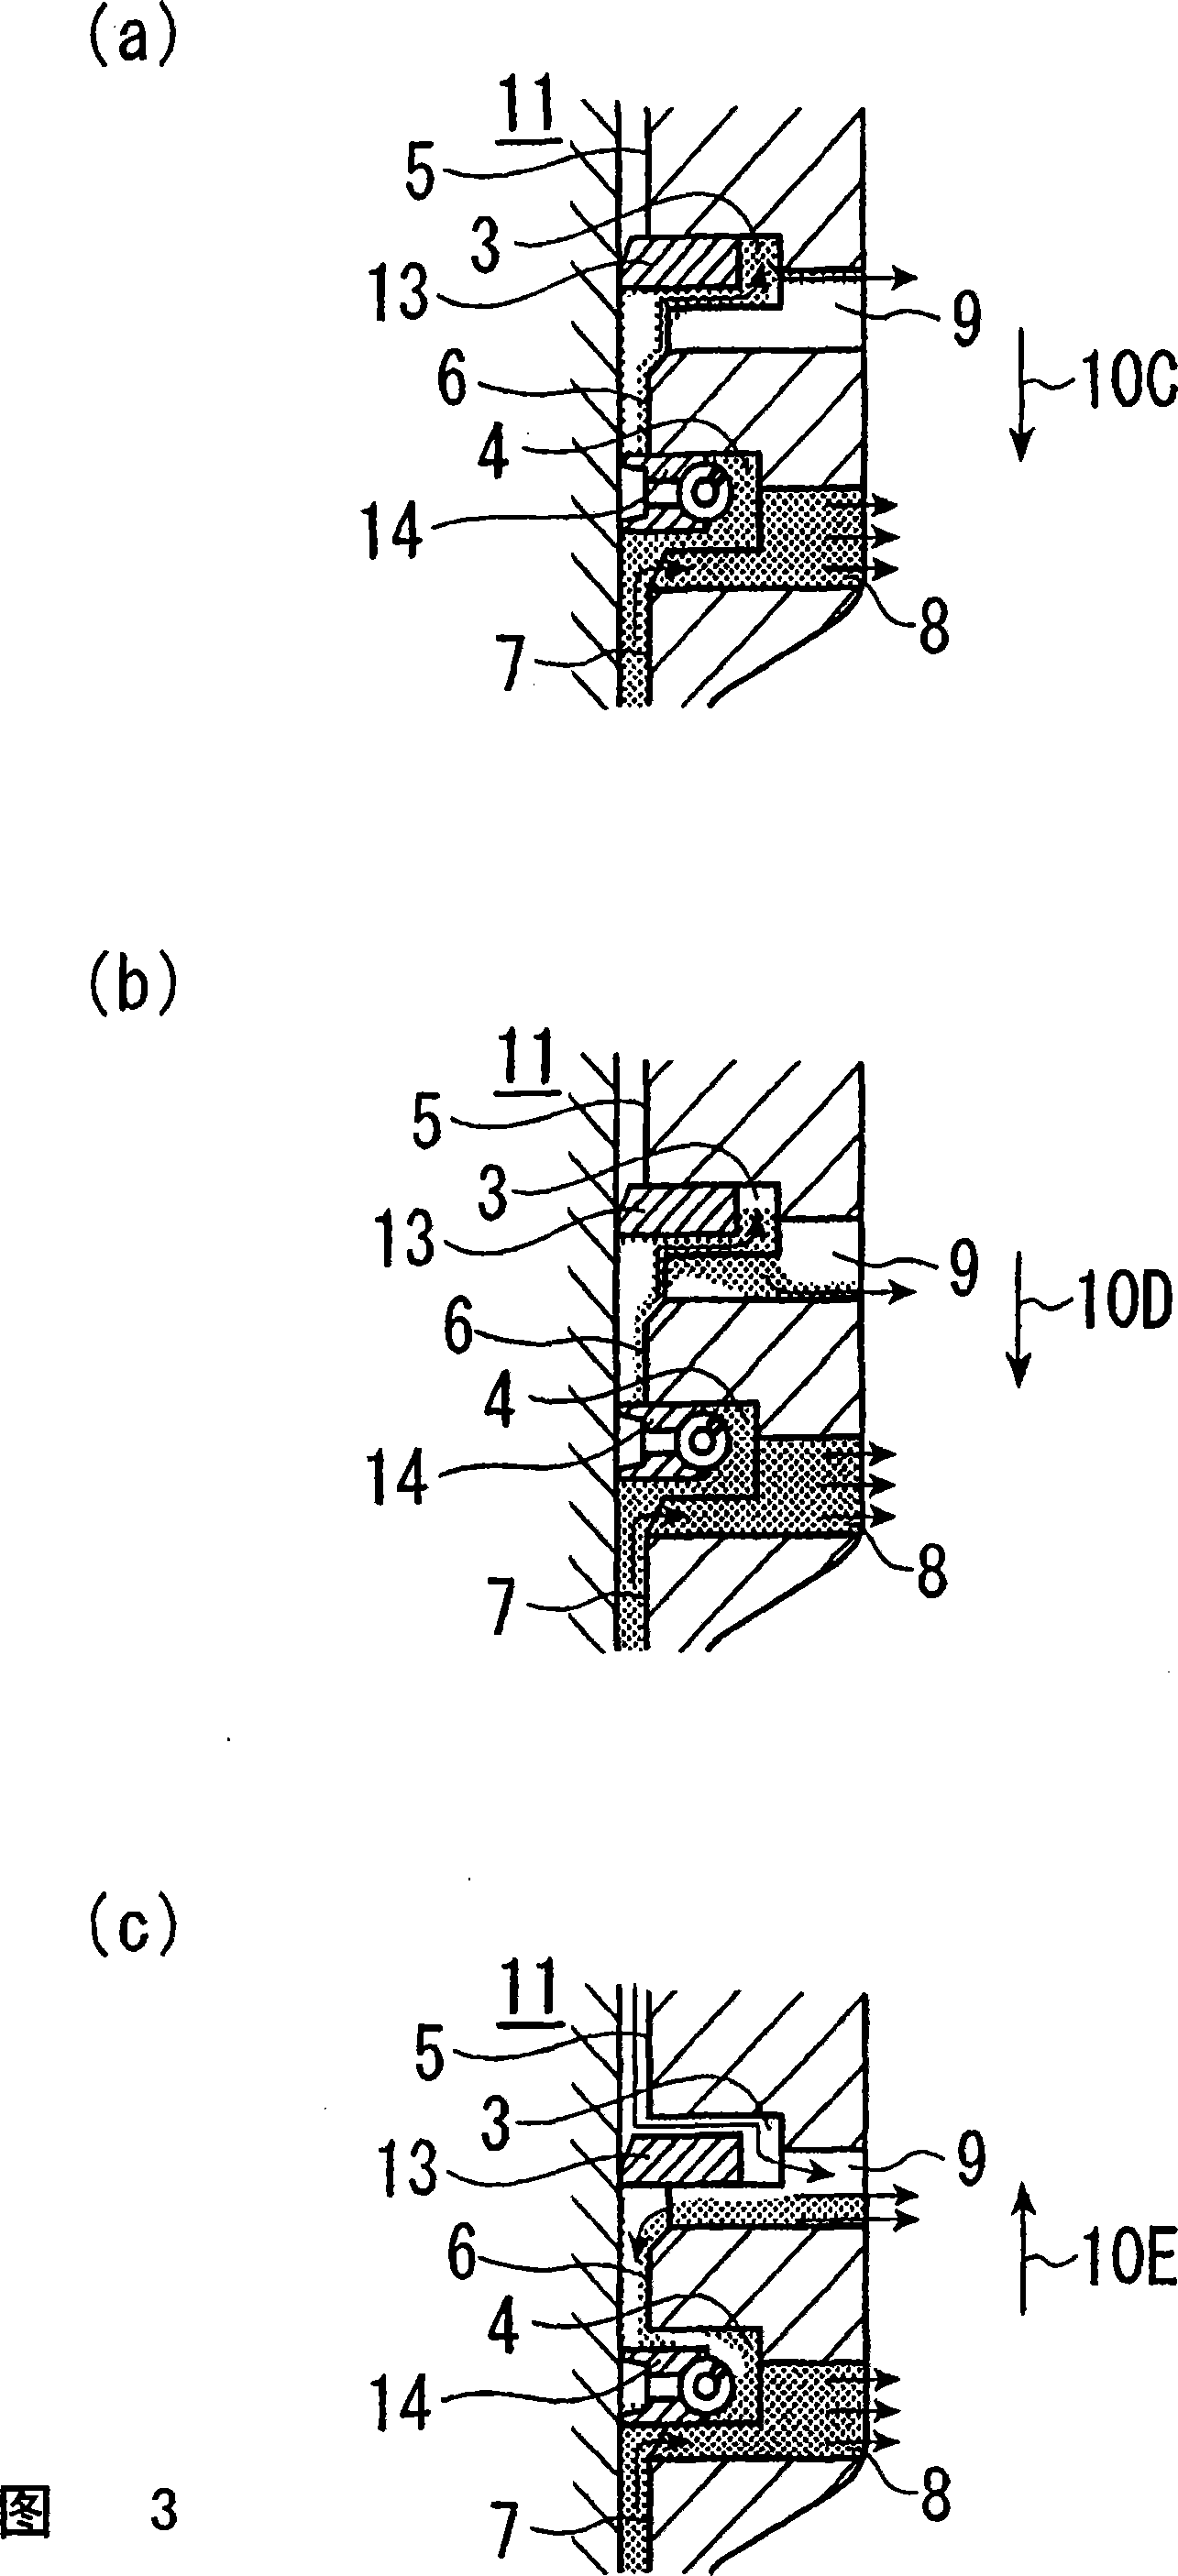 Piston for internal-combustion engine and combination of piston and piston ring for internal-combustion engine